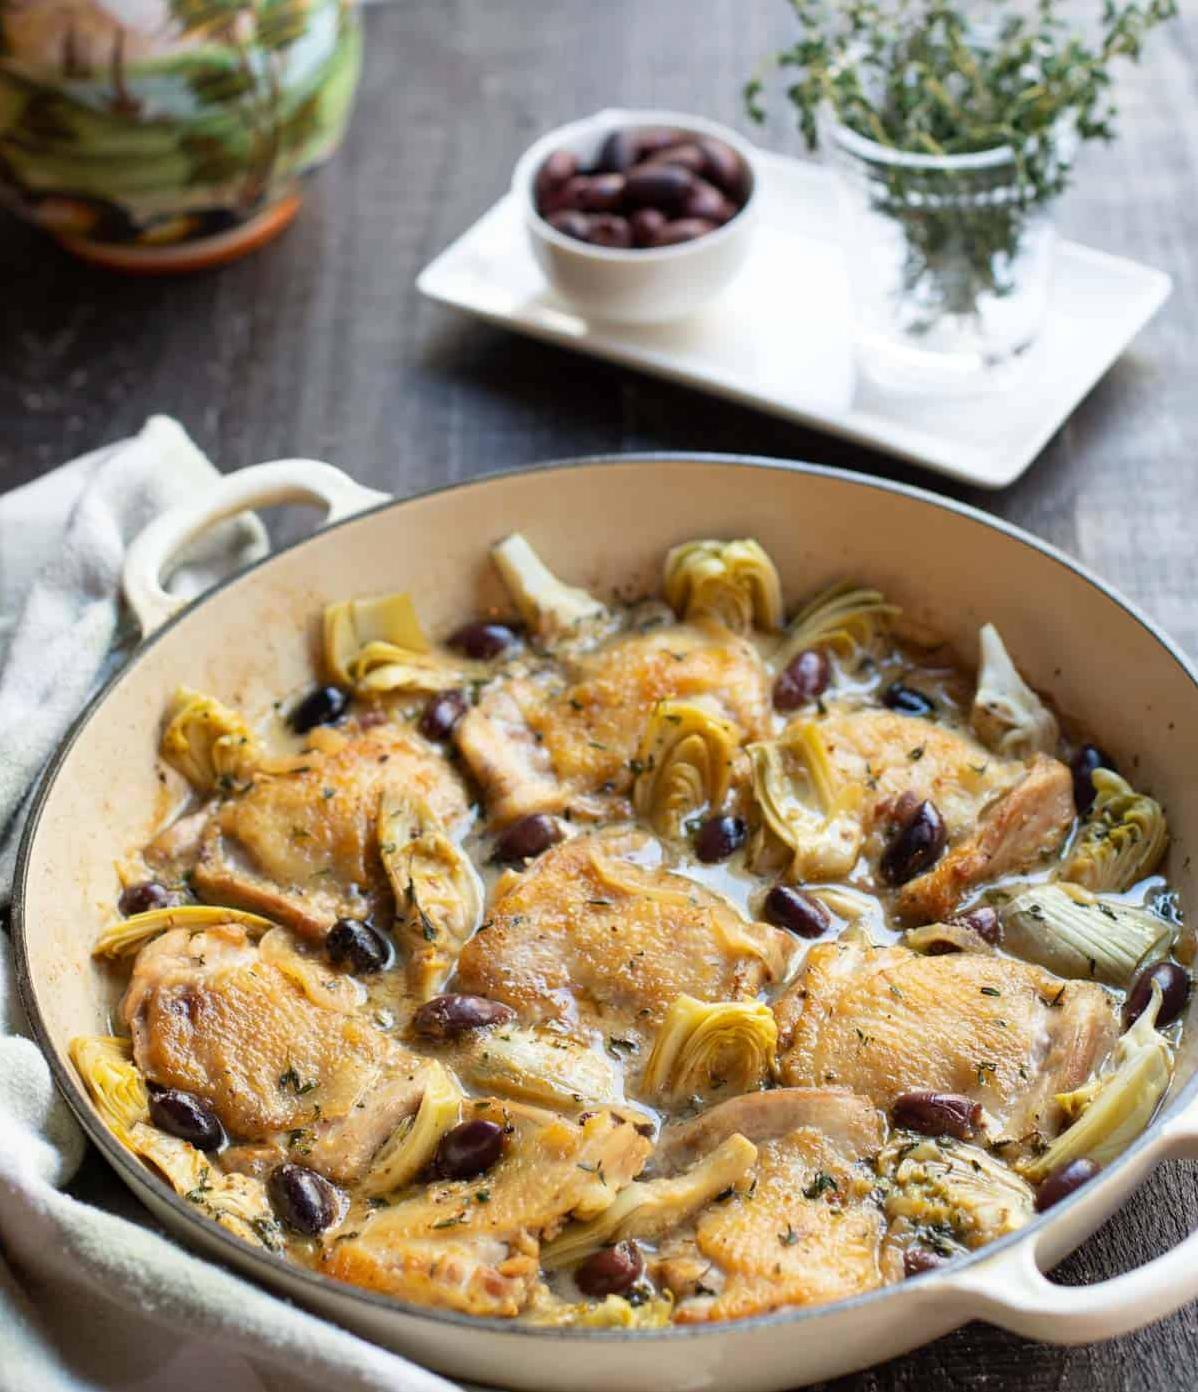  Golden brown chicken with artichoke – a match made in heaven